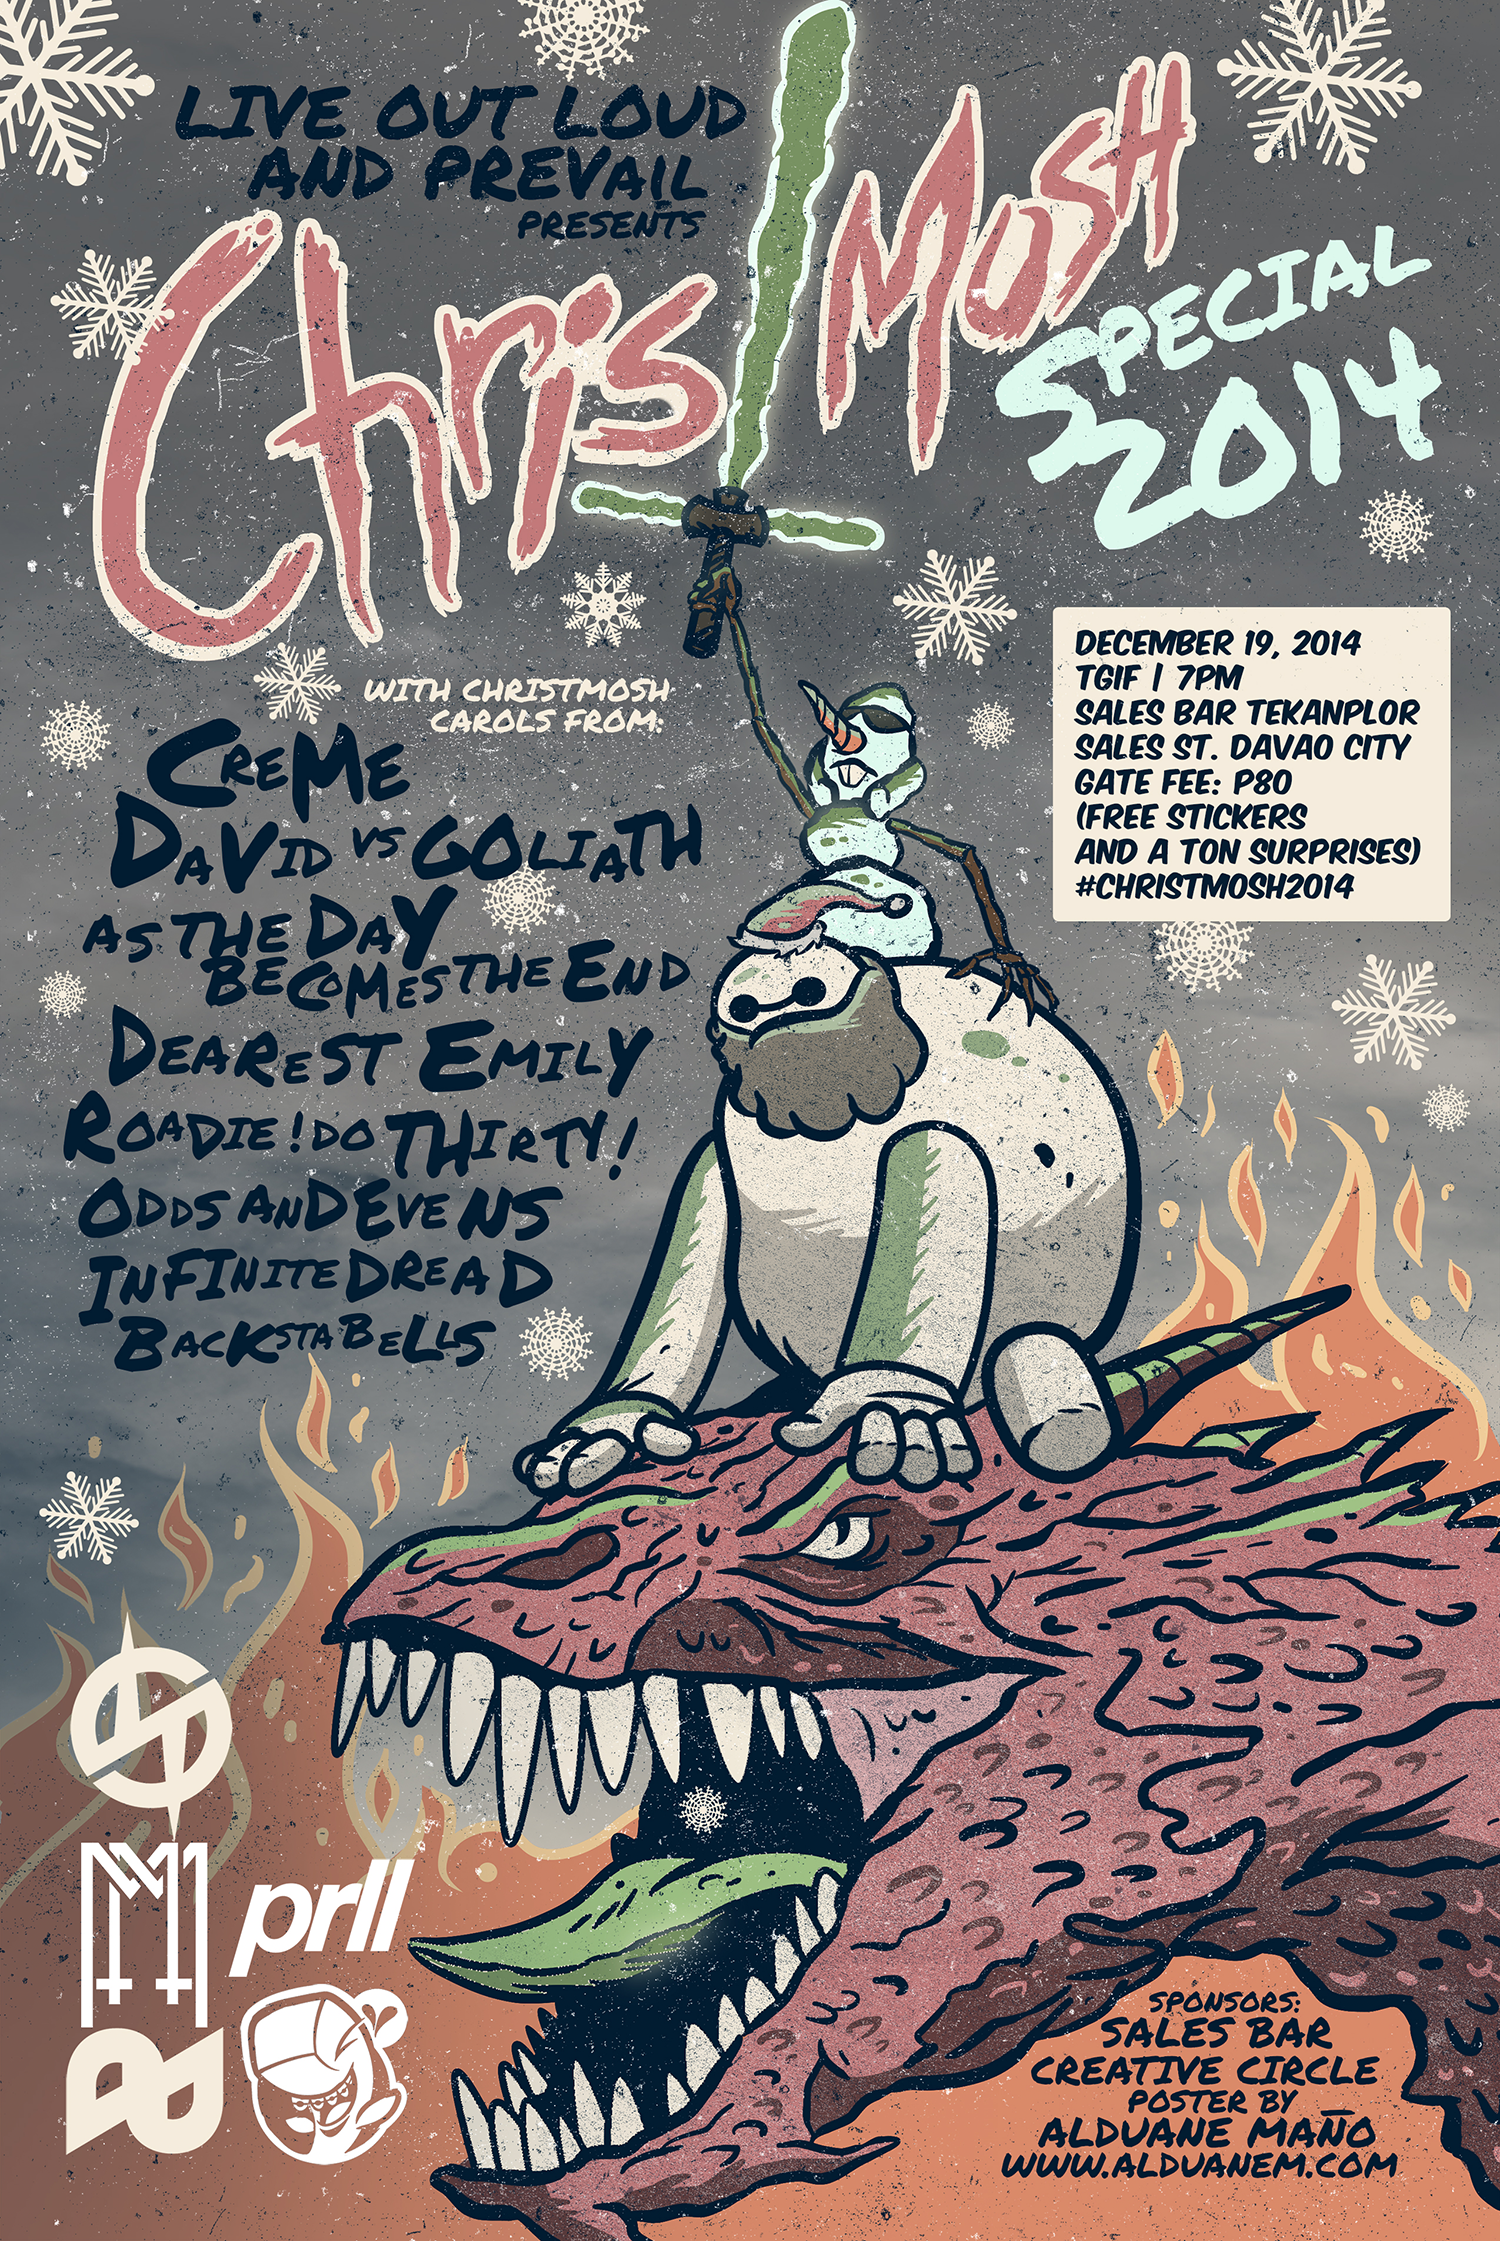 christmosh special 2014 poster alduane mano m olaf frozen baymax smaug the hobbit.png